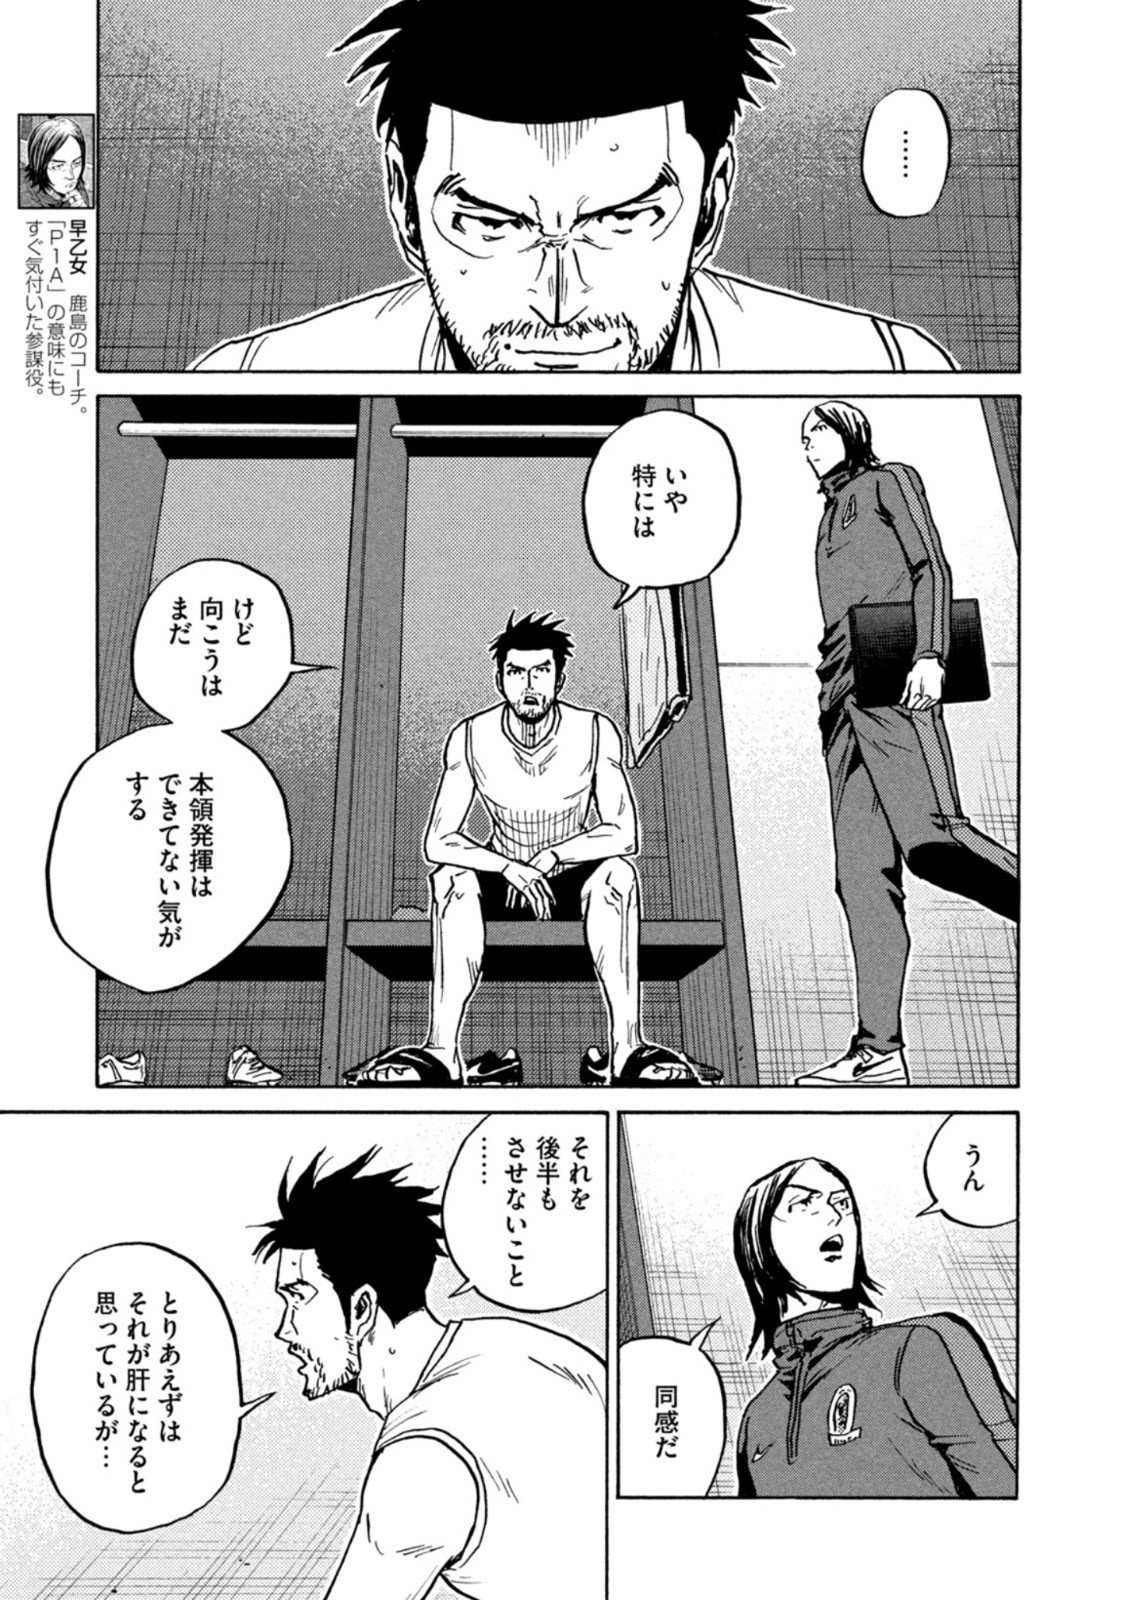 Giant Killing - Chapter 625 - Page 7